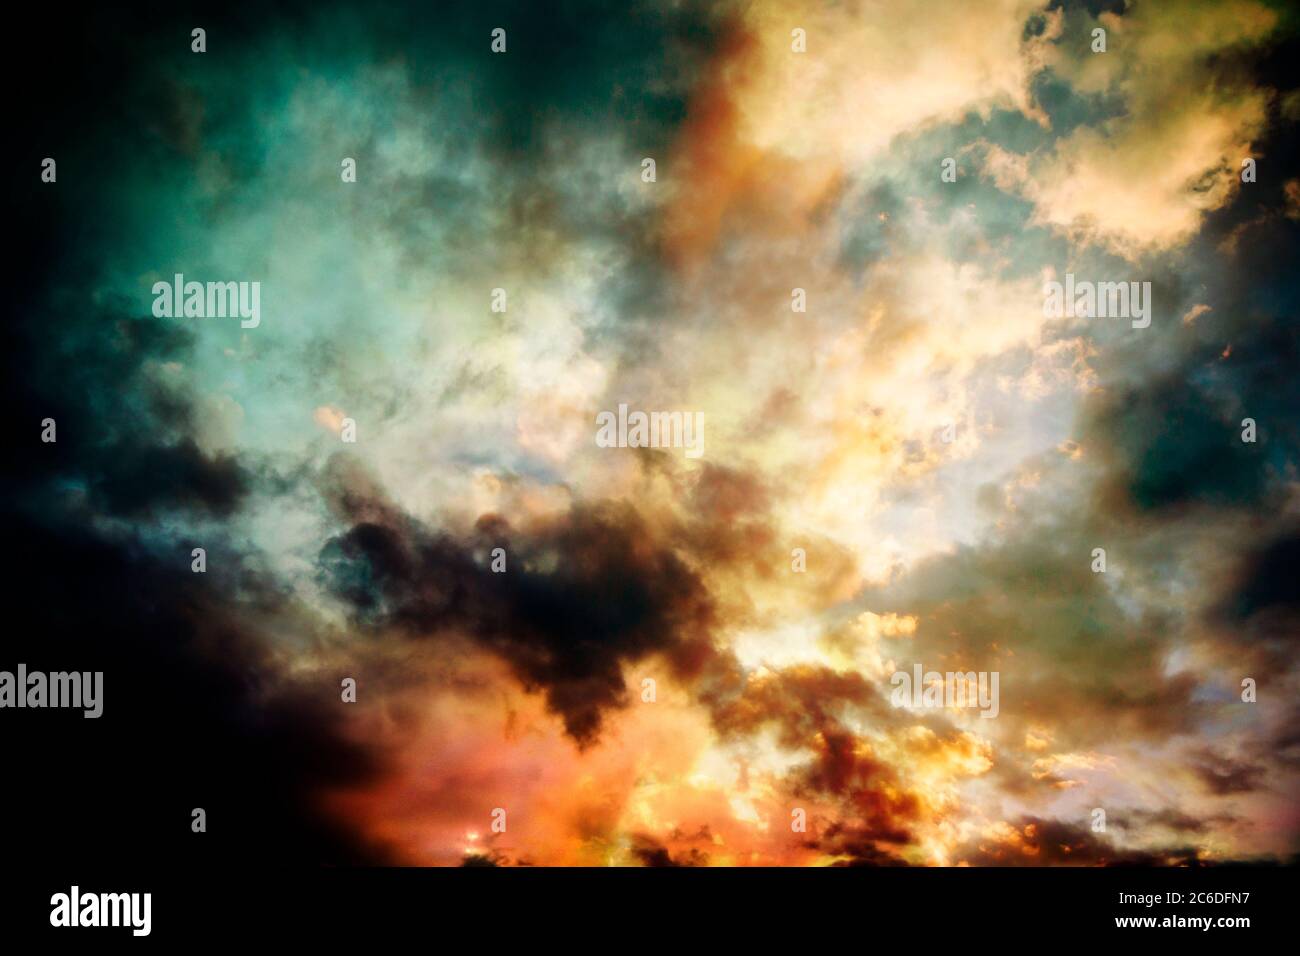 colorful sky with clouds as wall art, background Stock Photo